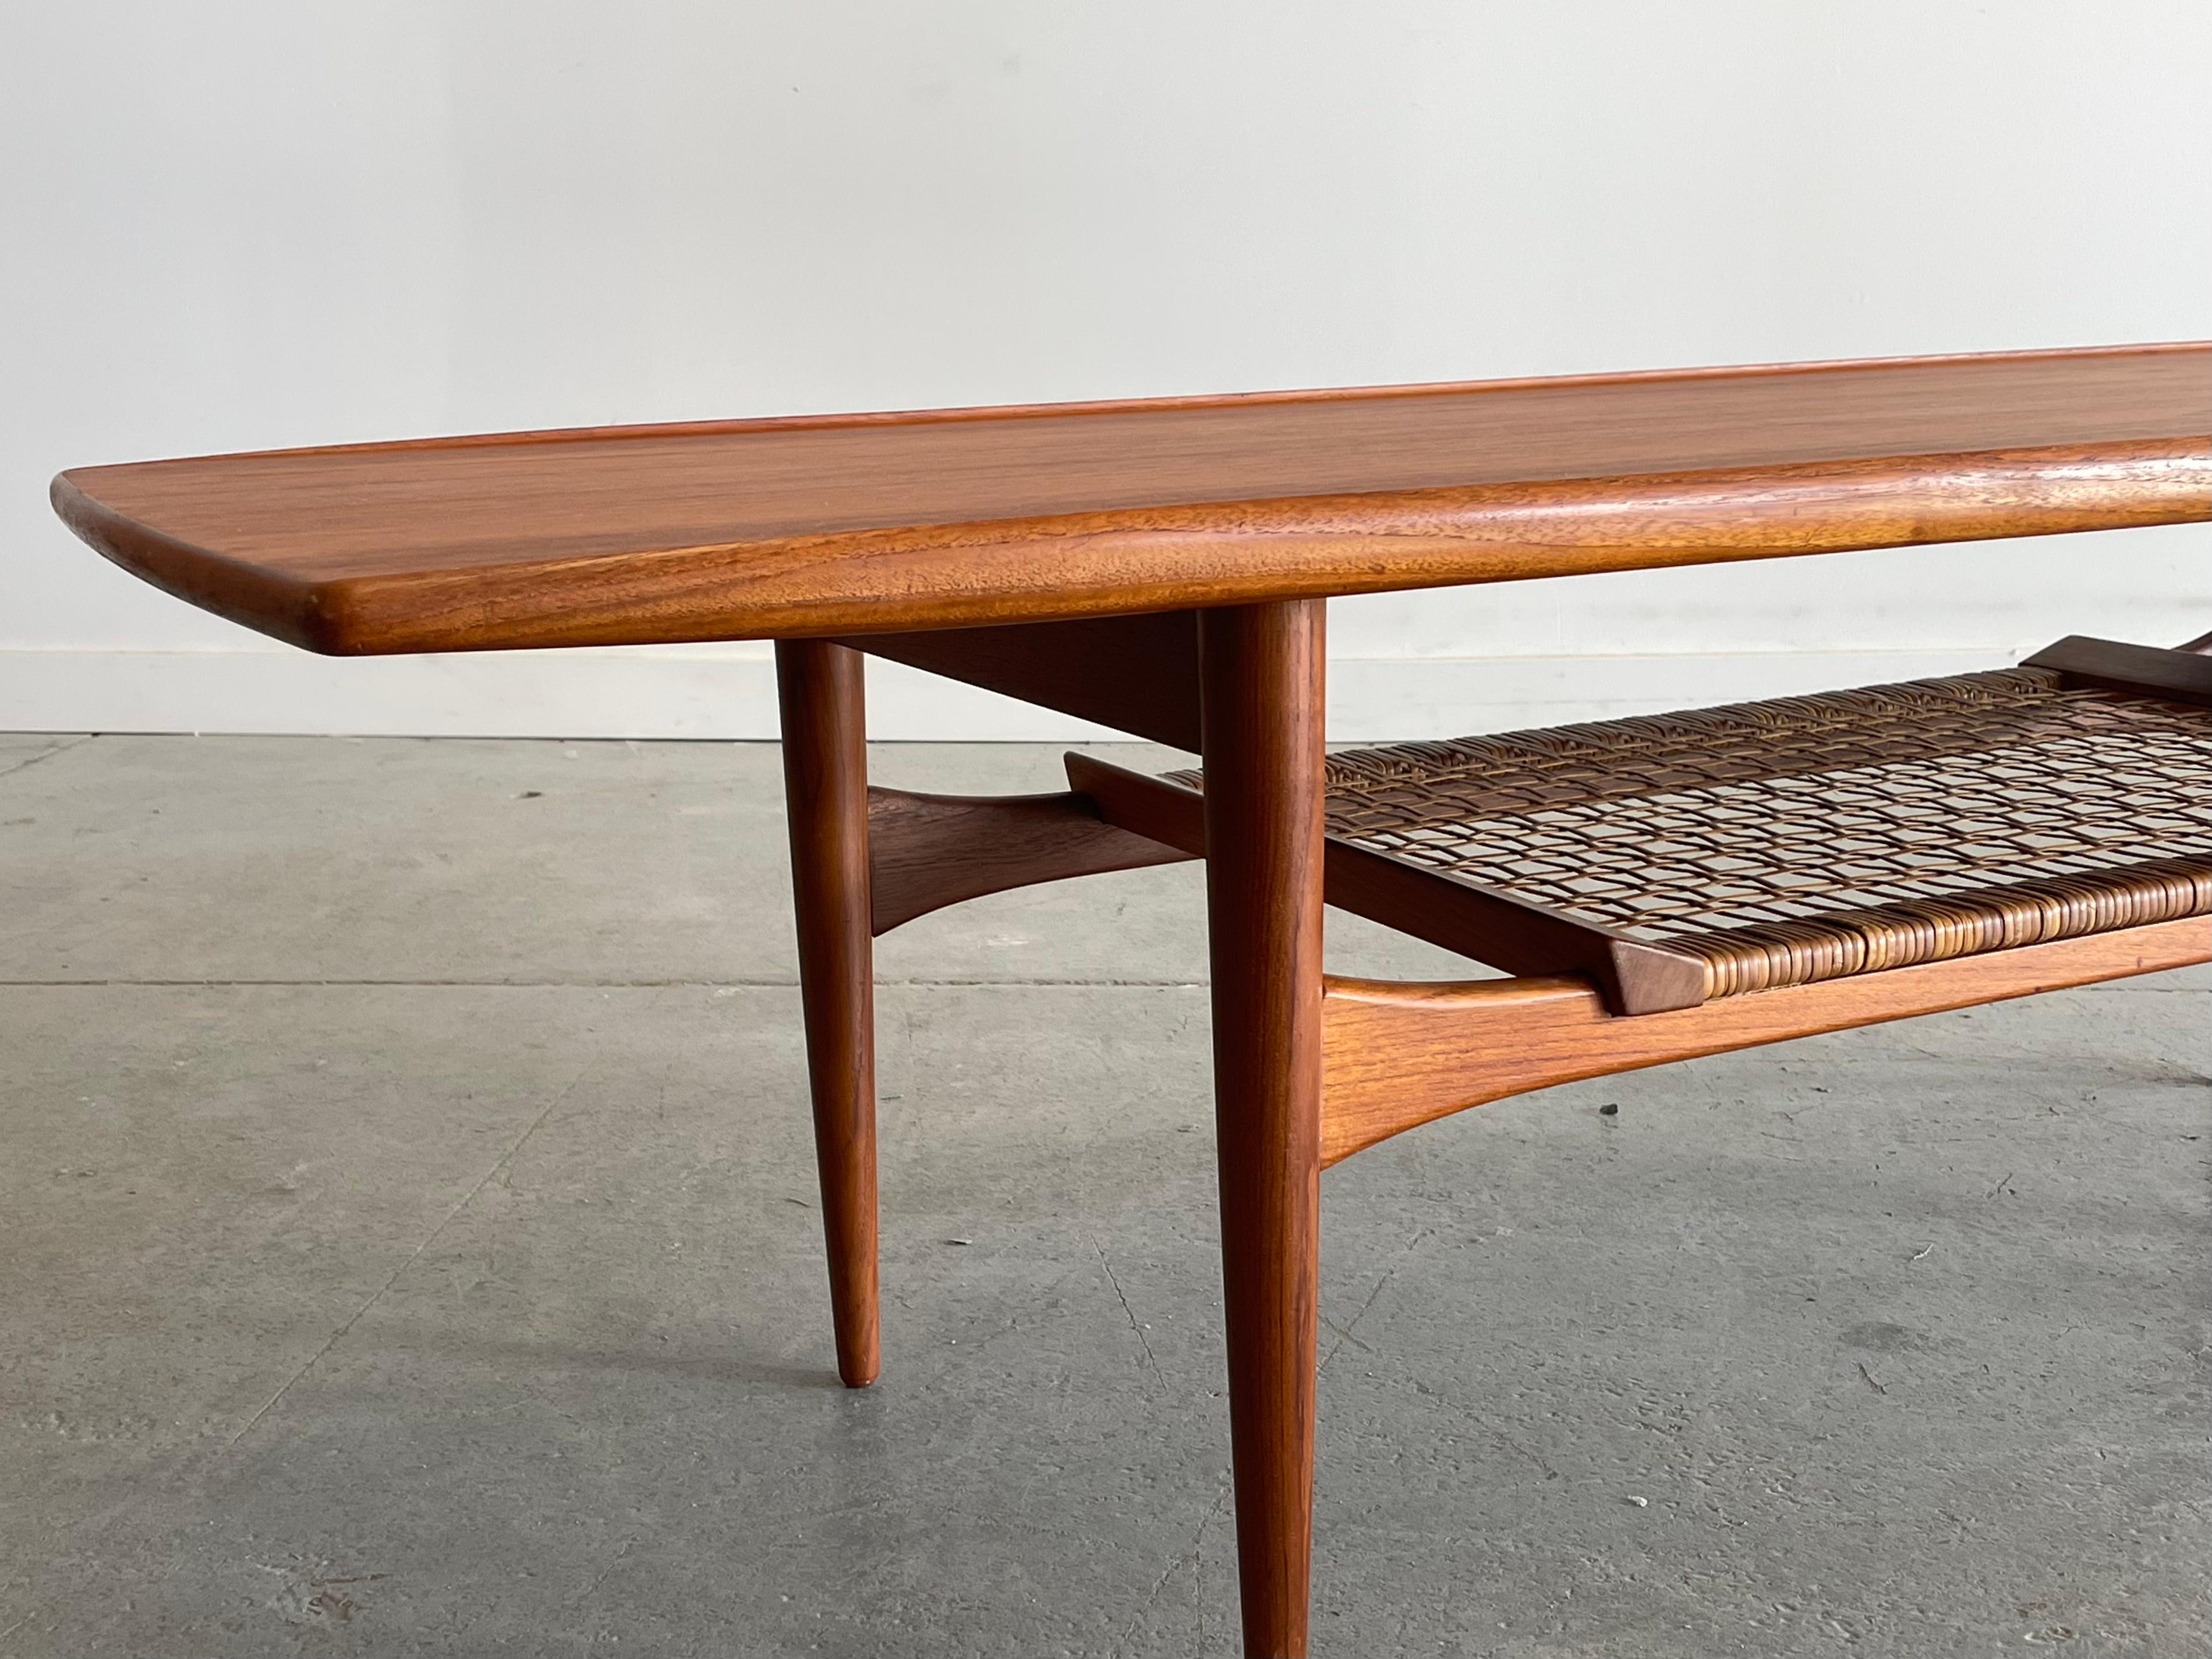 Beautiful Danish teak coffee table by Kristiansen & Thomassen, Denmark. This striking piece features nicely sculpted edging and woven cane shelf. Measures 63” W x 22” D x 18” H. Nice restored condition with minor age-appropriate wear. 